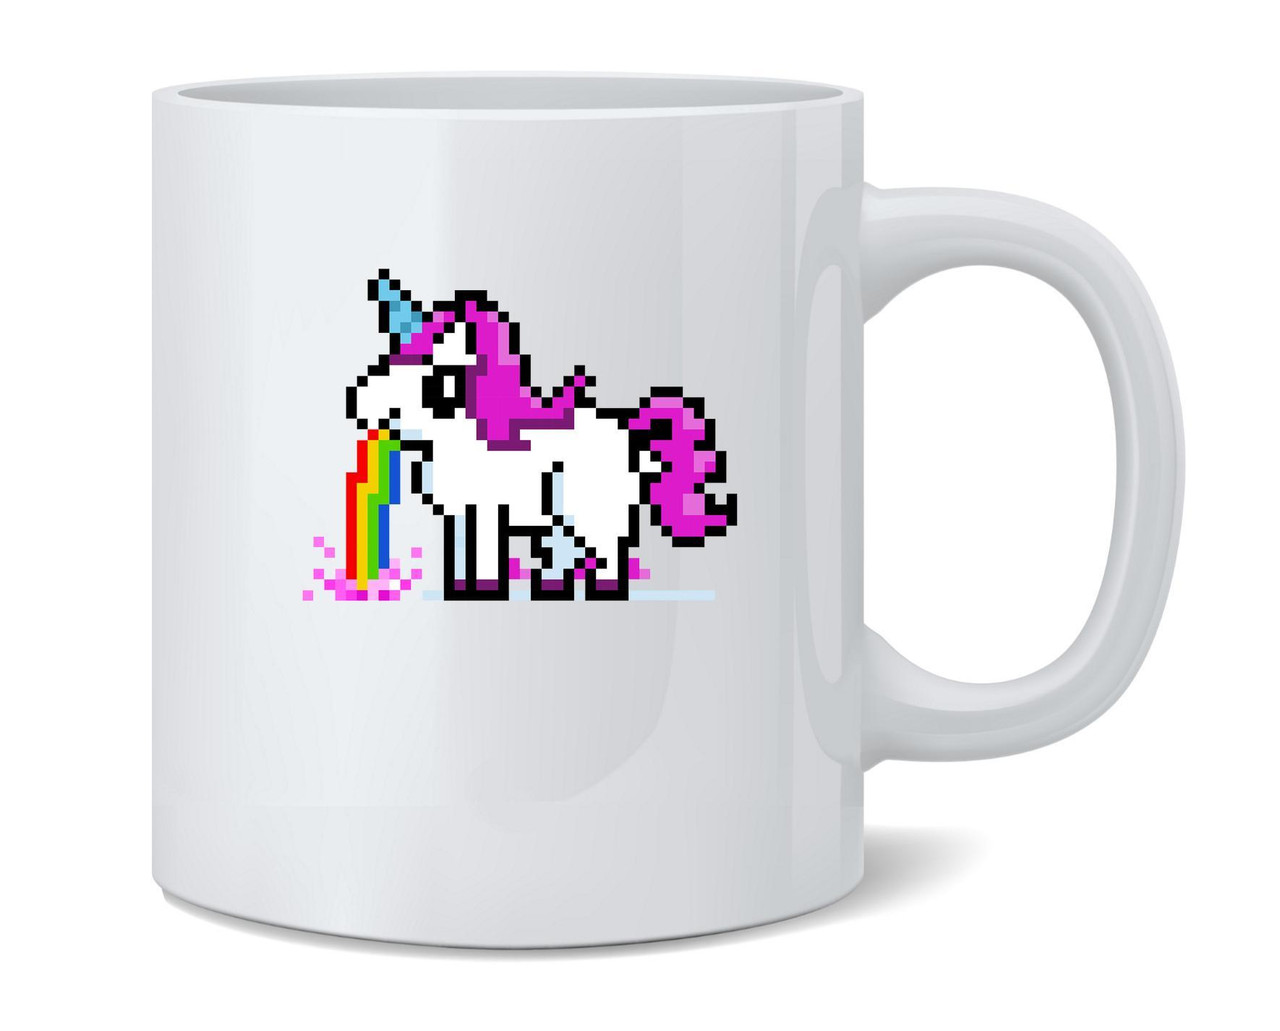 Funky Retro Mugs. Classic Toys Video Games Spectrum Tea Coffee Cup Novelty  Gift